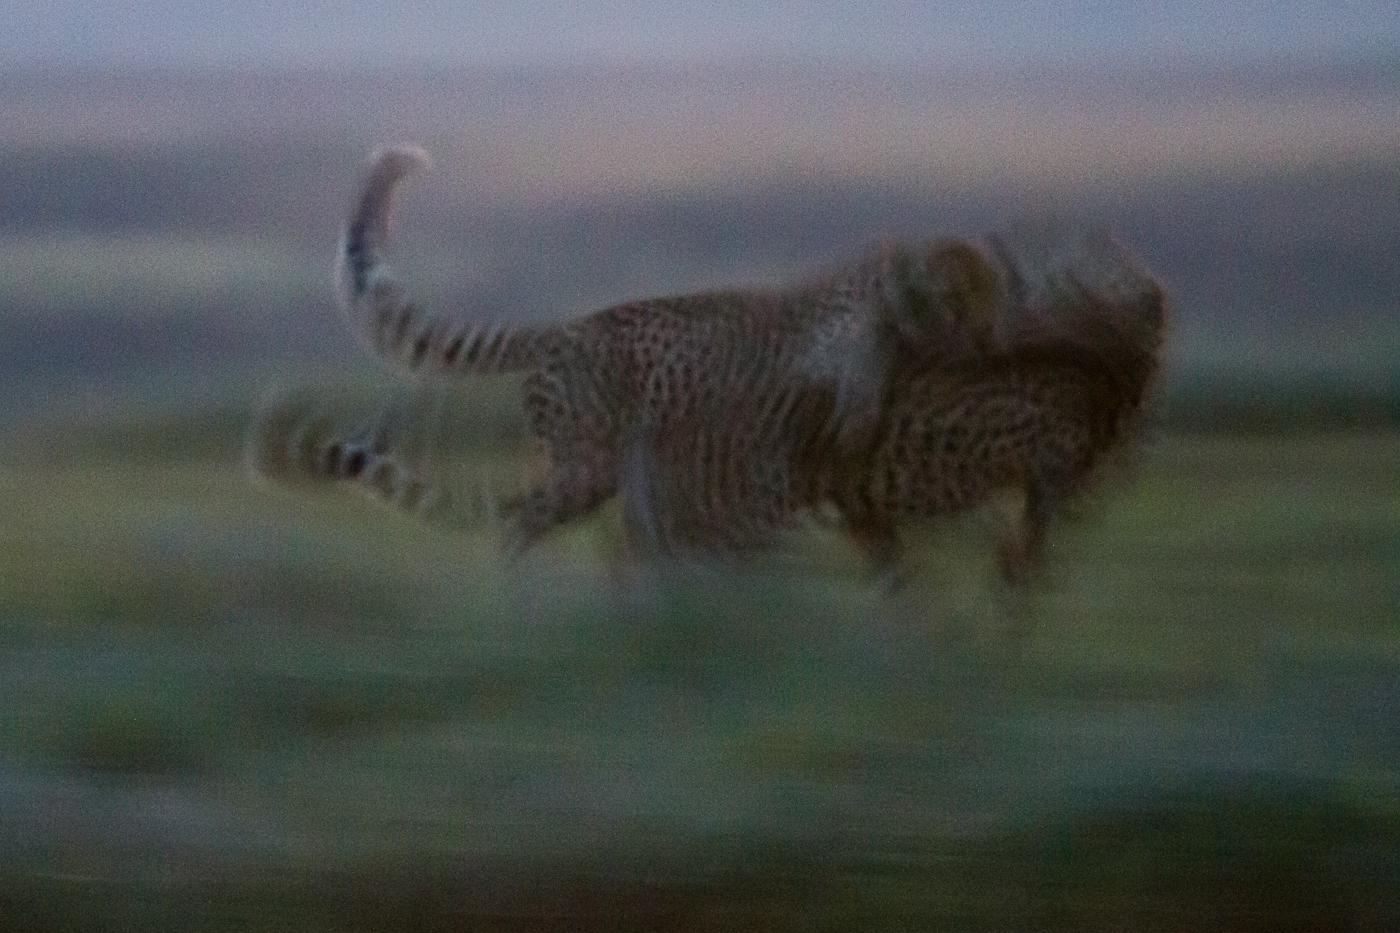 two cheetah cubs playfighting after dark